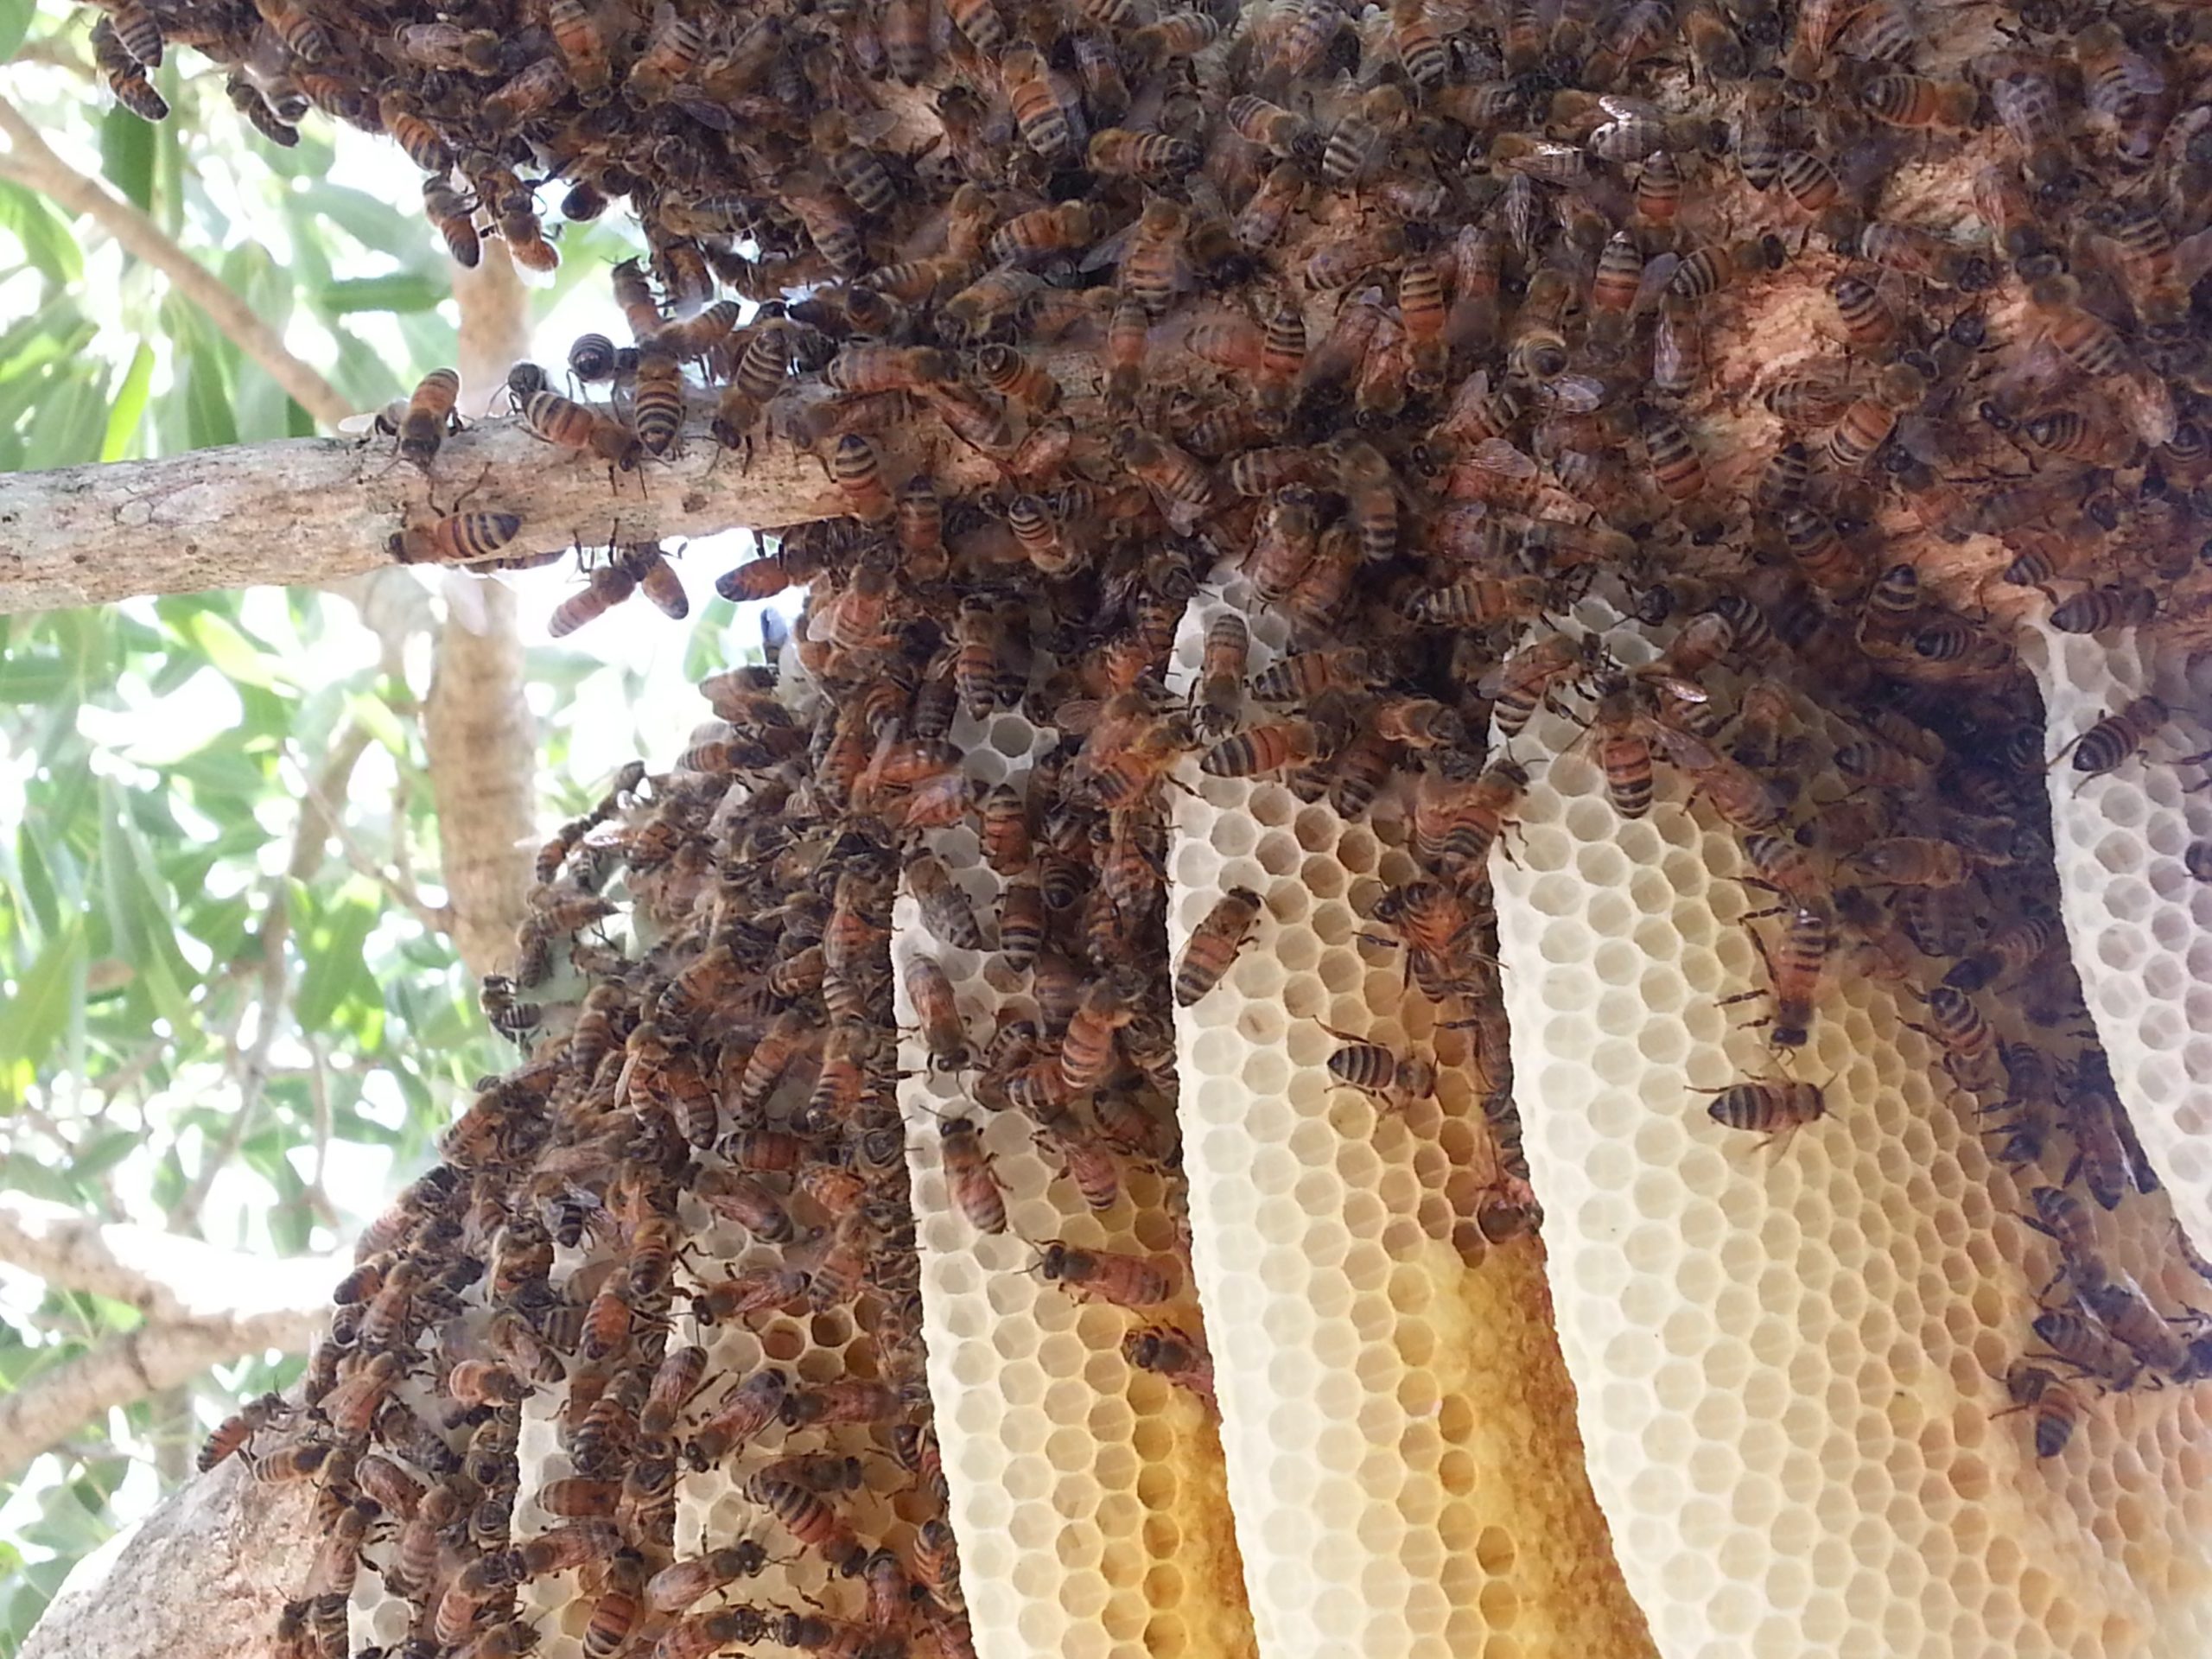 BeeBoyz and The Florida Forest Service team up (Mites in Honeycomb)